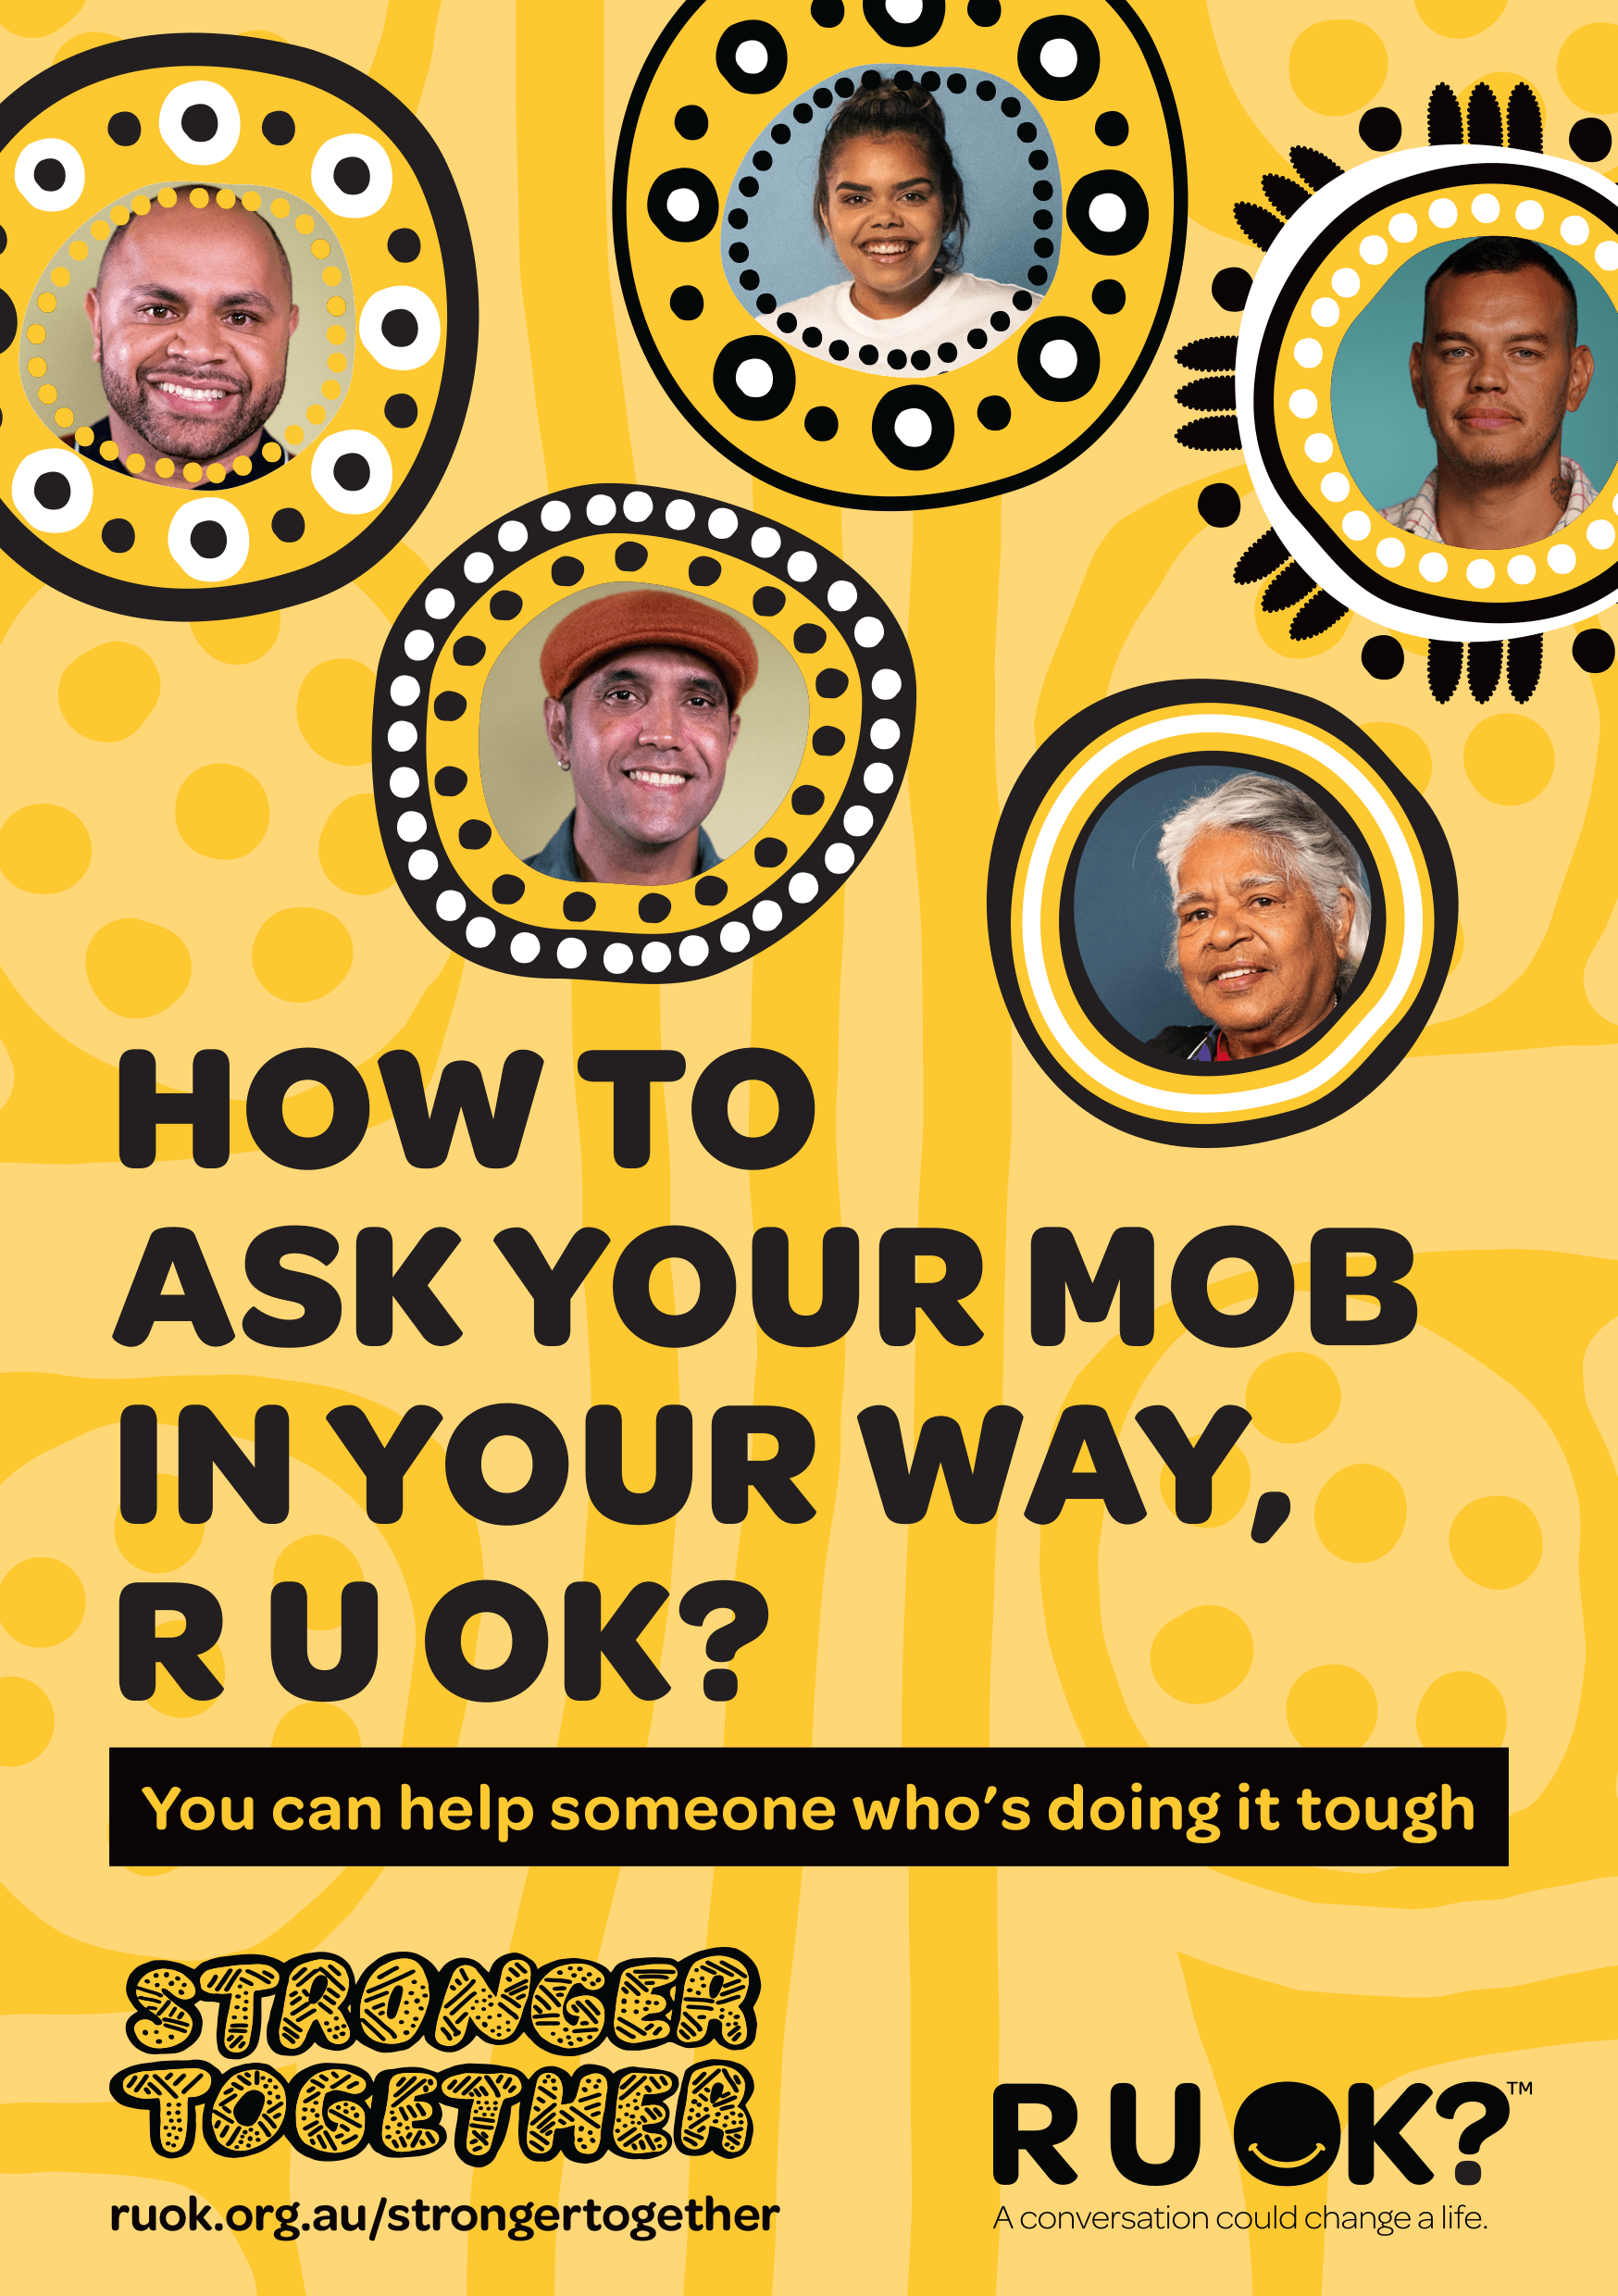 How to Ask your mob, in your own way, Are you OK?